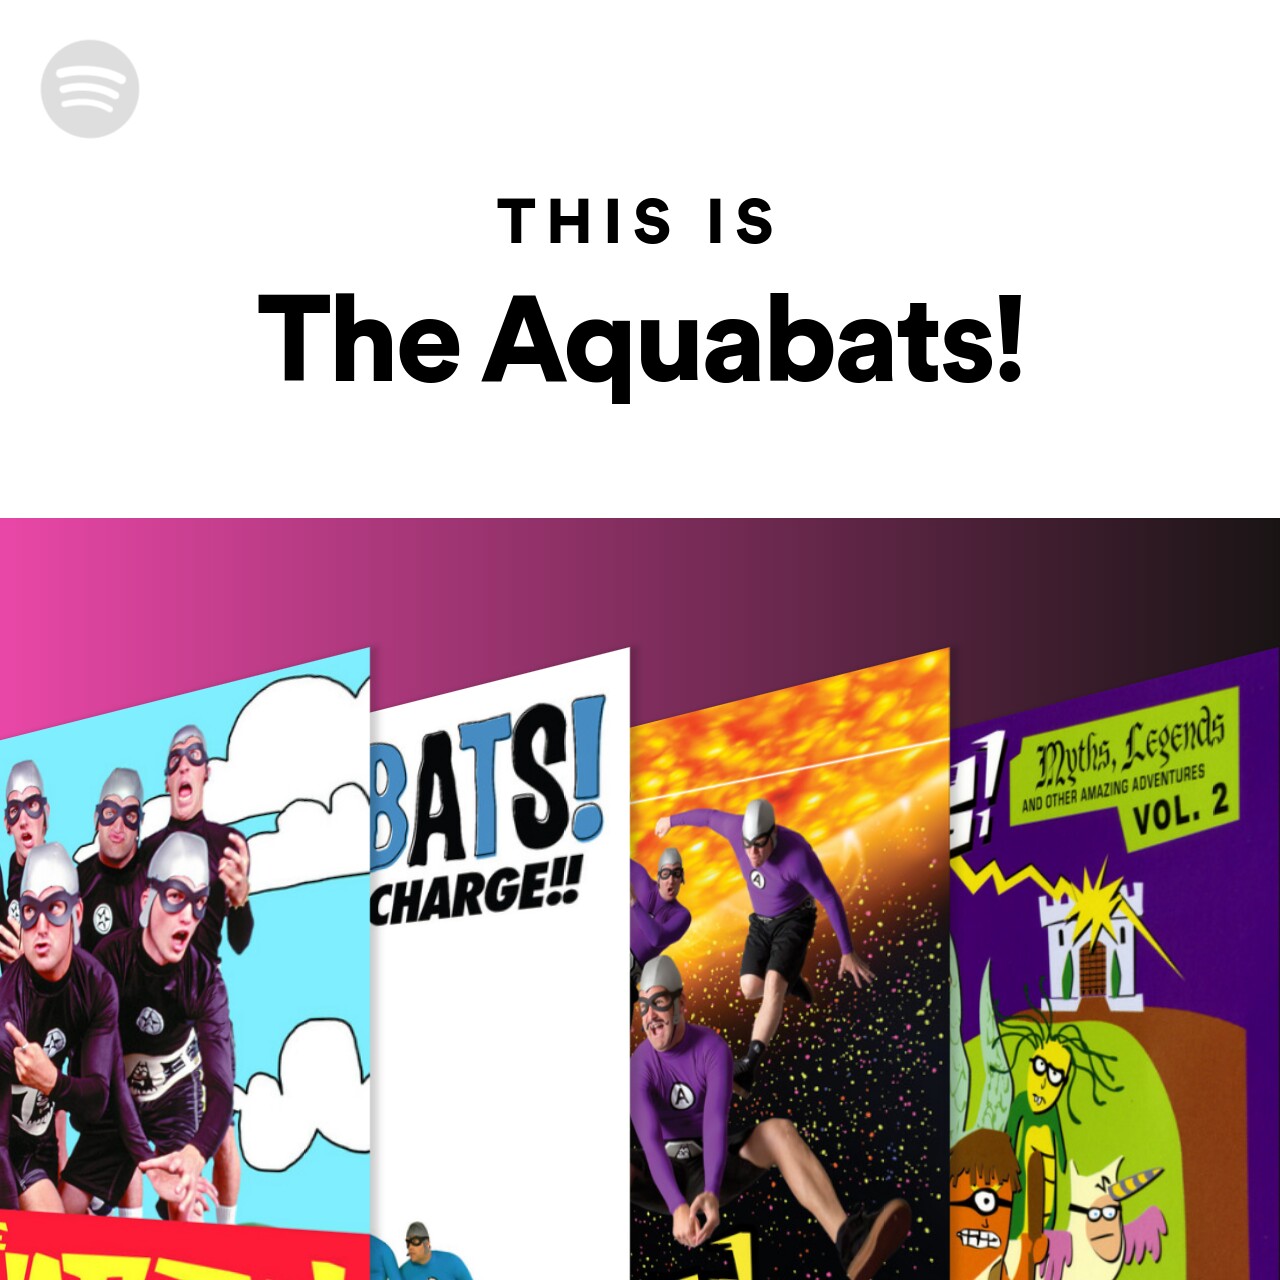 This Is The Aquabats!